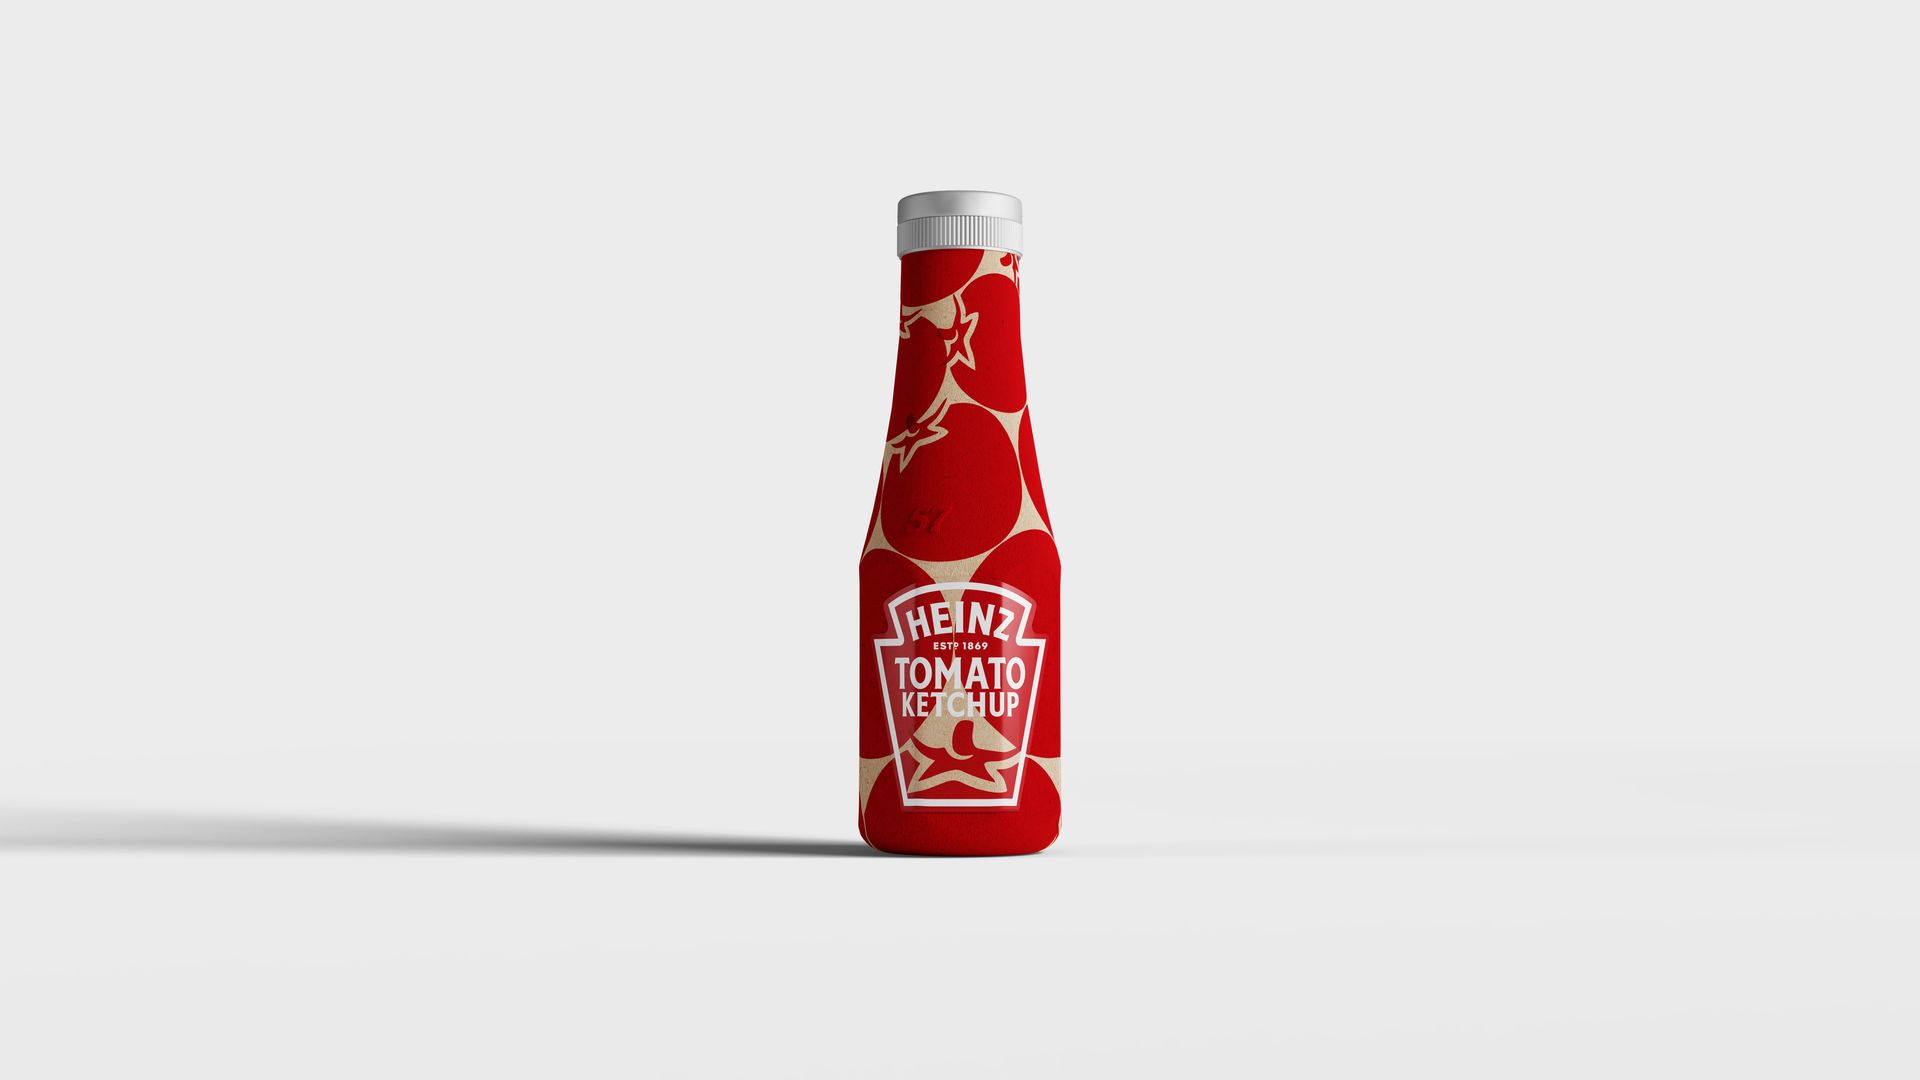 A proposed all-paper Heinz ketchup bottle.